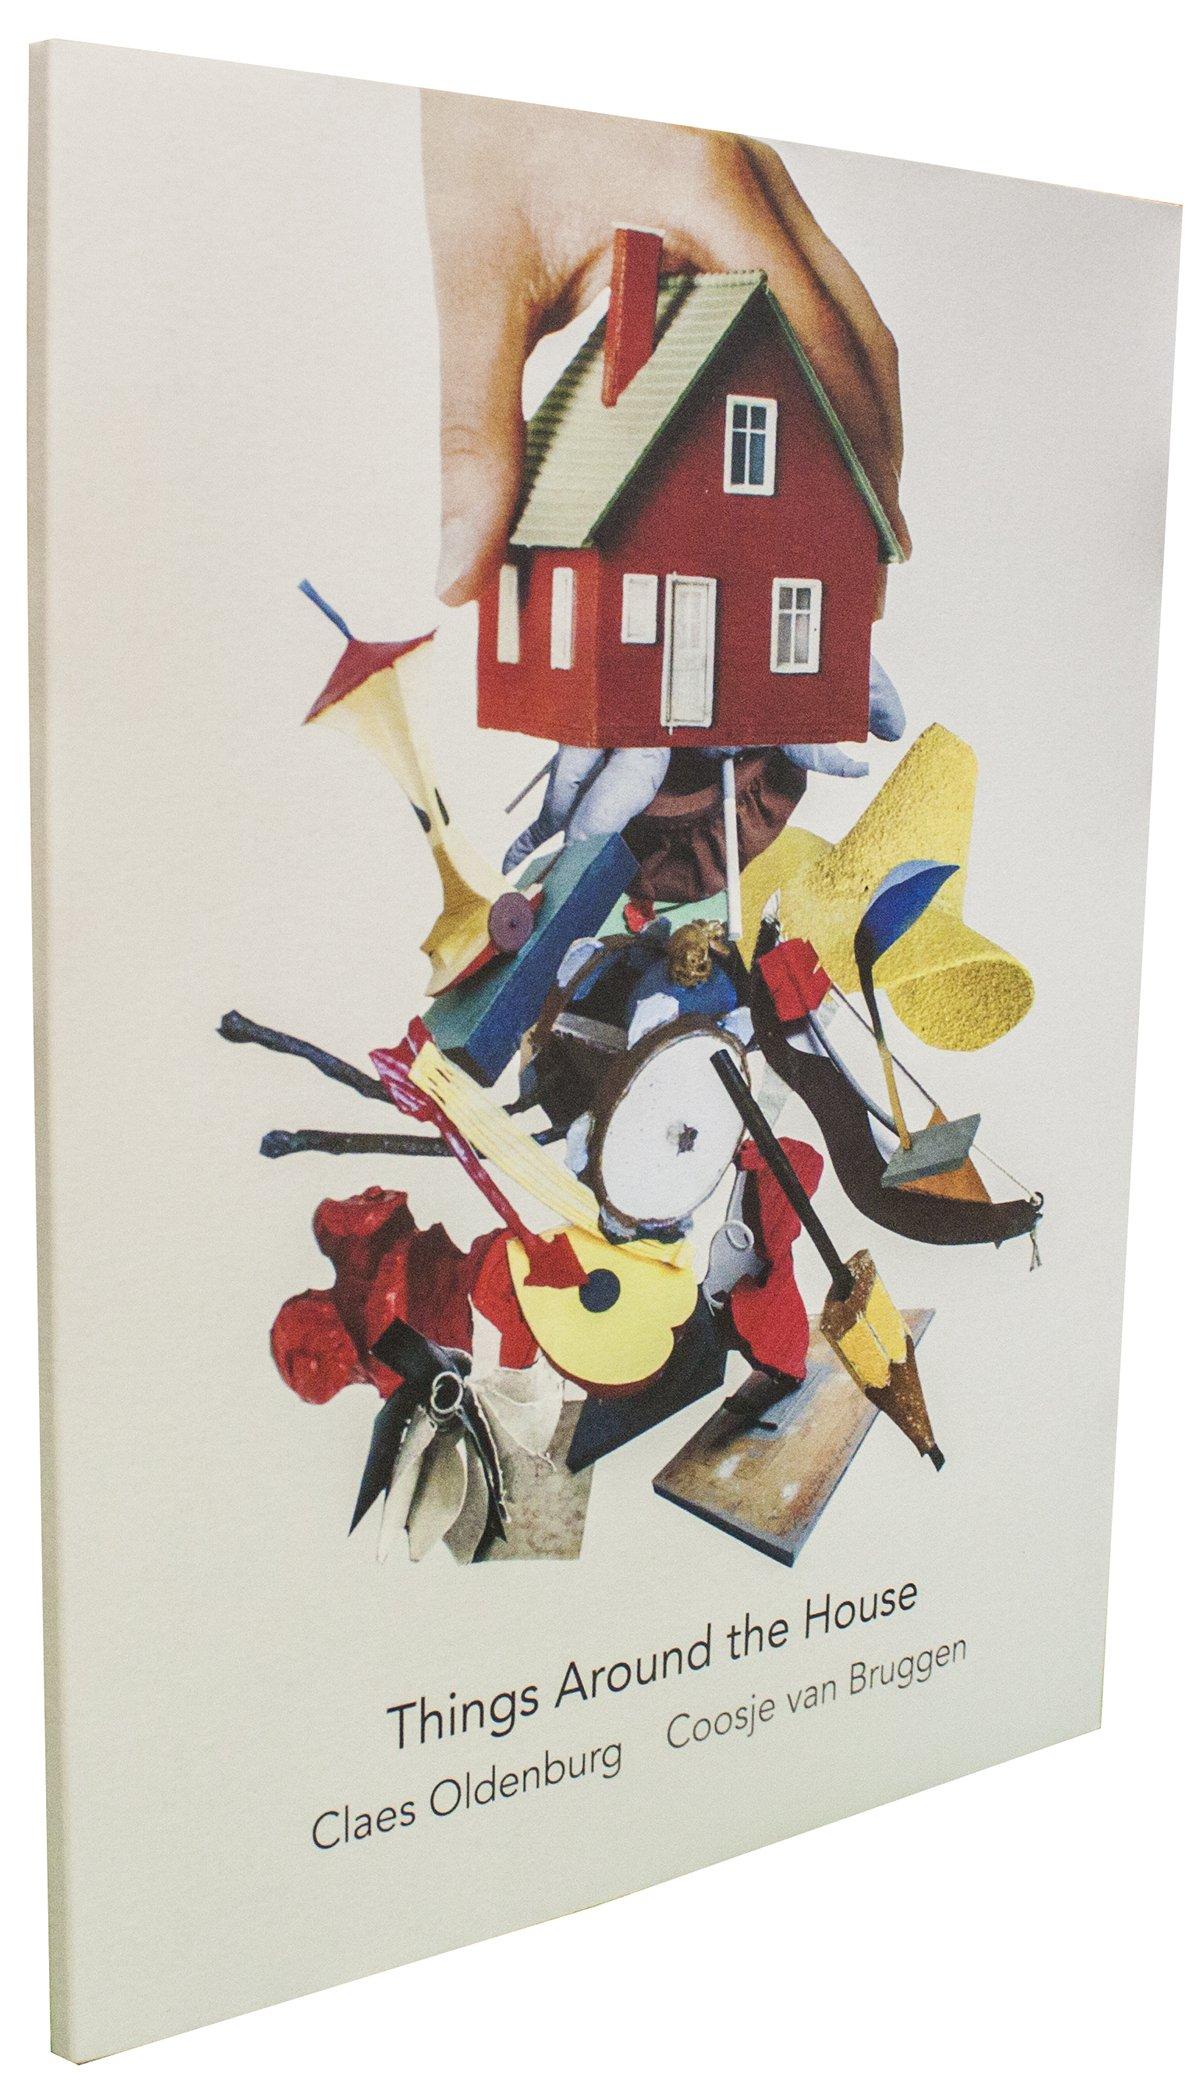 2015 Claes Oldenburg 'Things Around the House' White USA Book - Print by Unknown